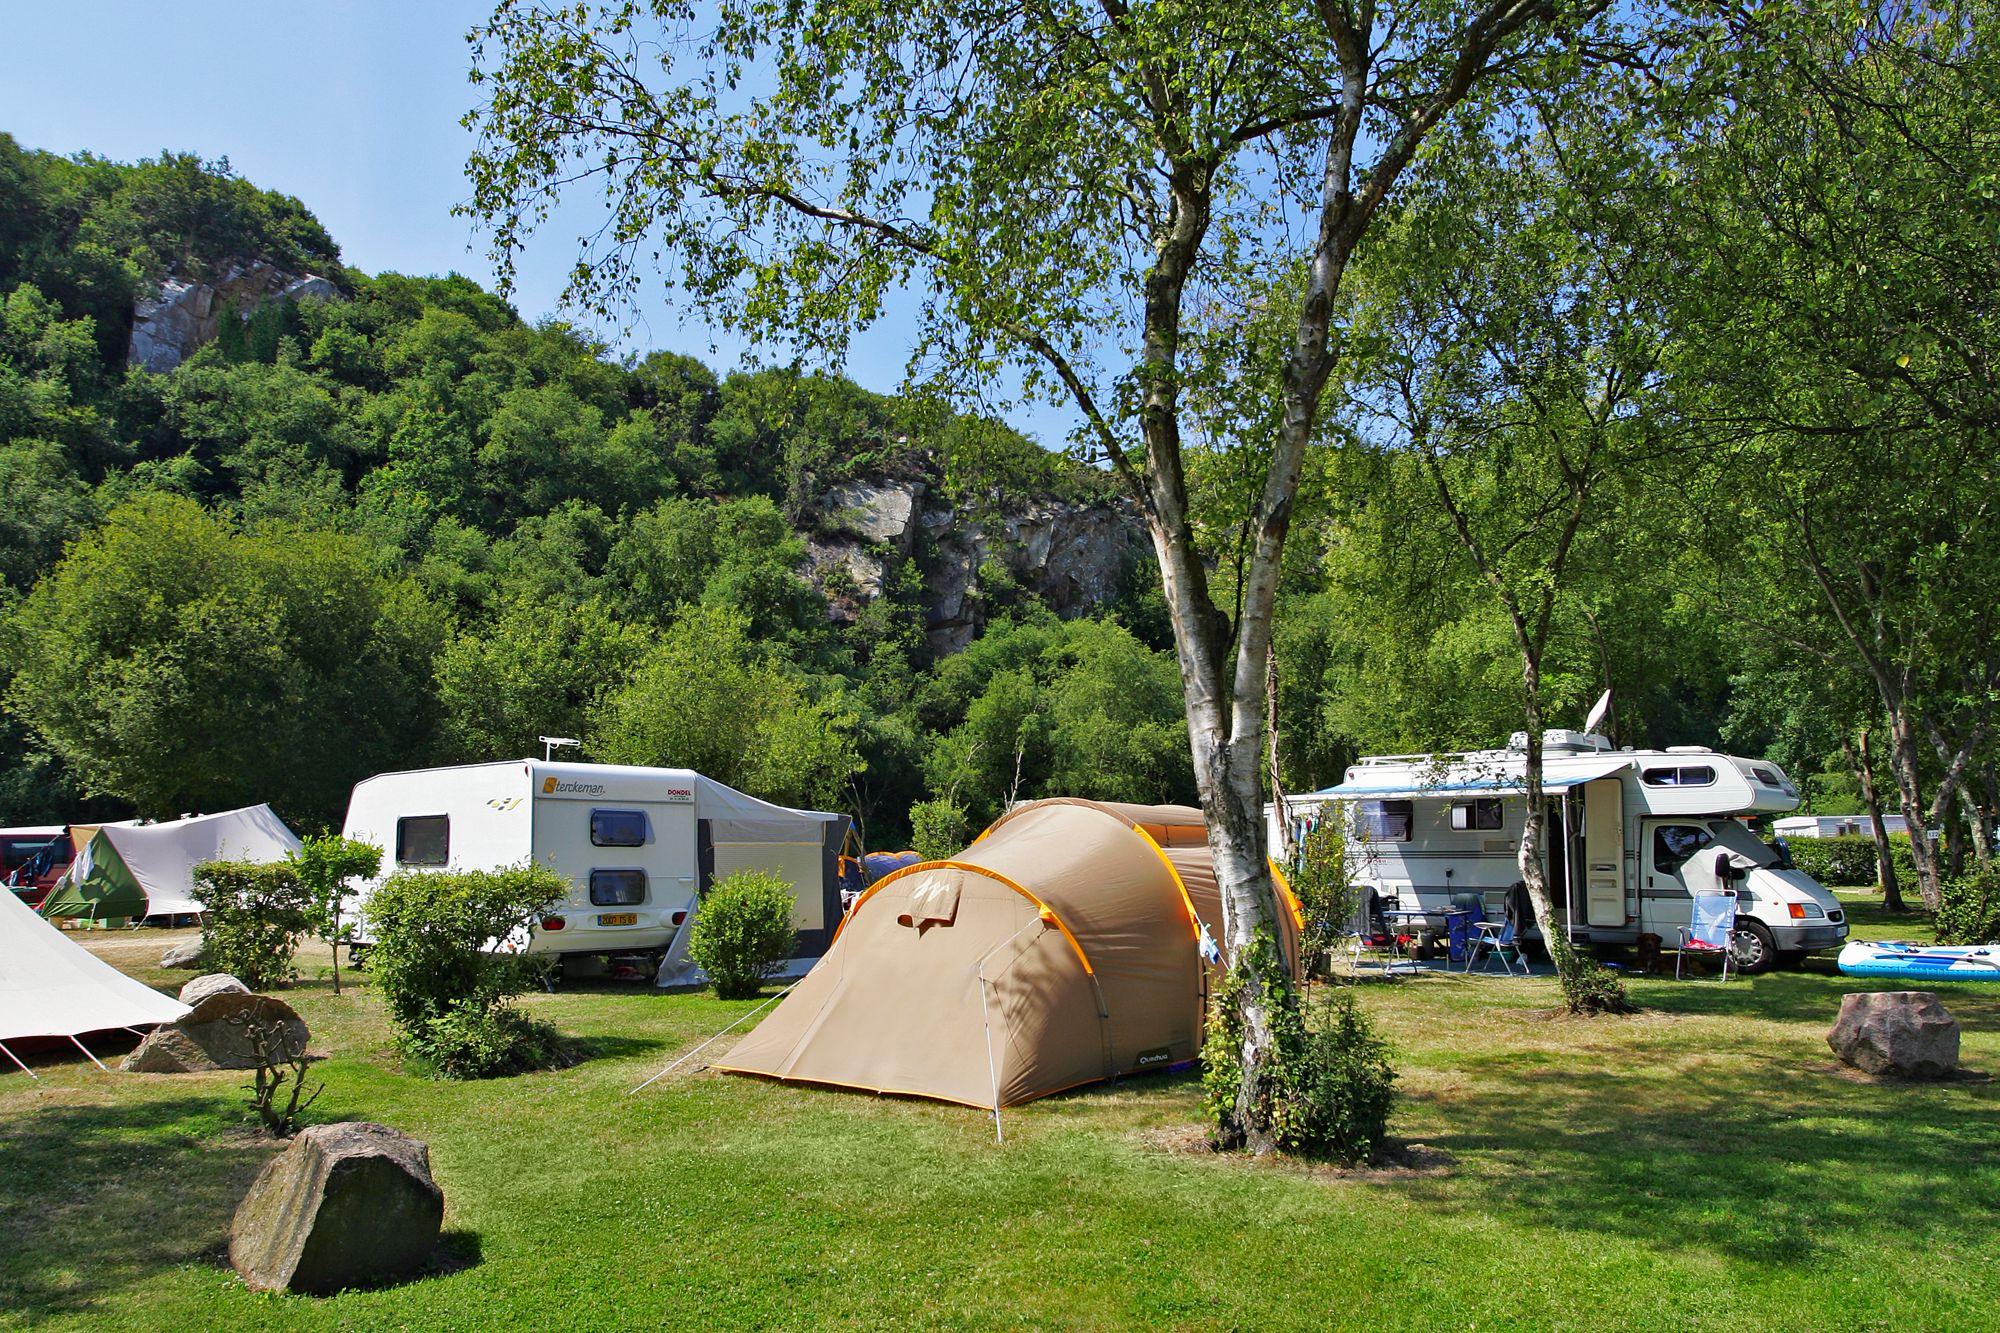 The Closest Campsites in France 16 Campsites Near the Ferry Ports